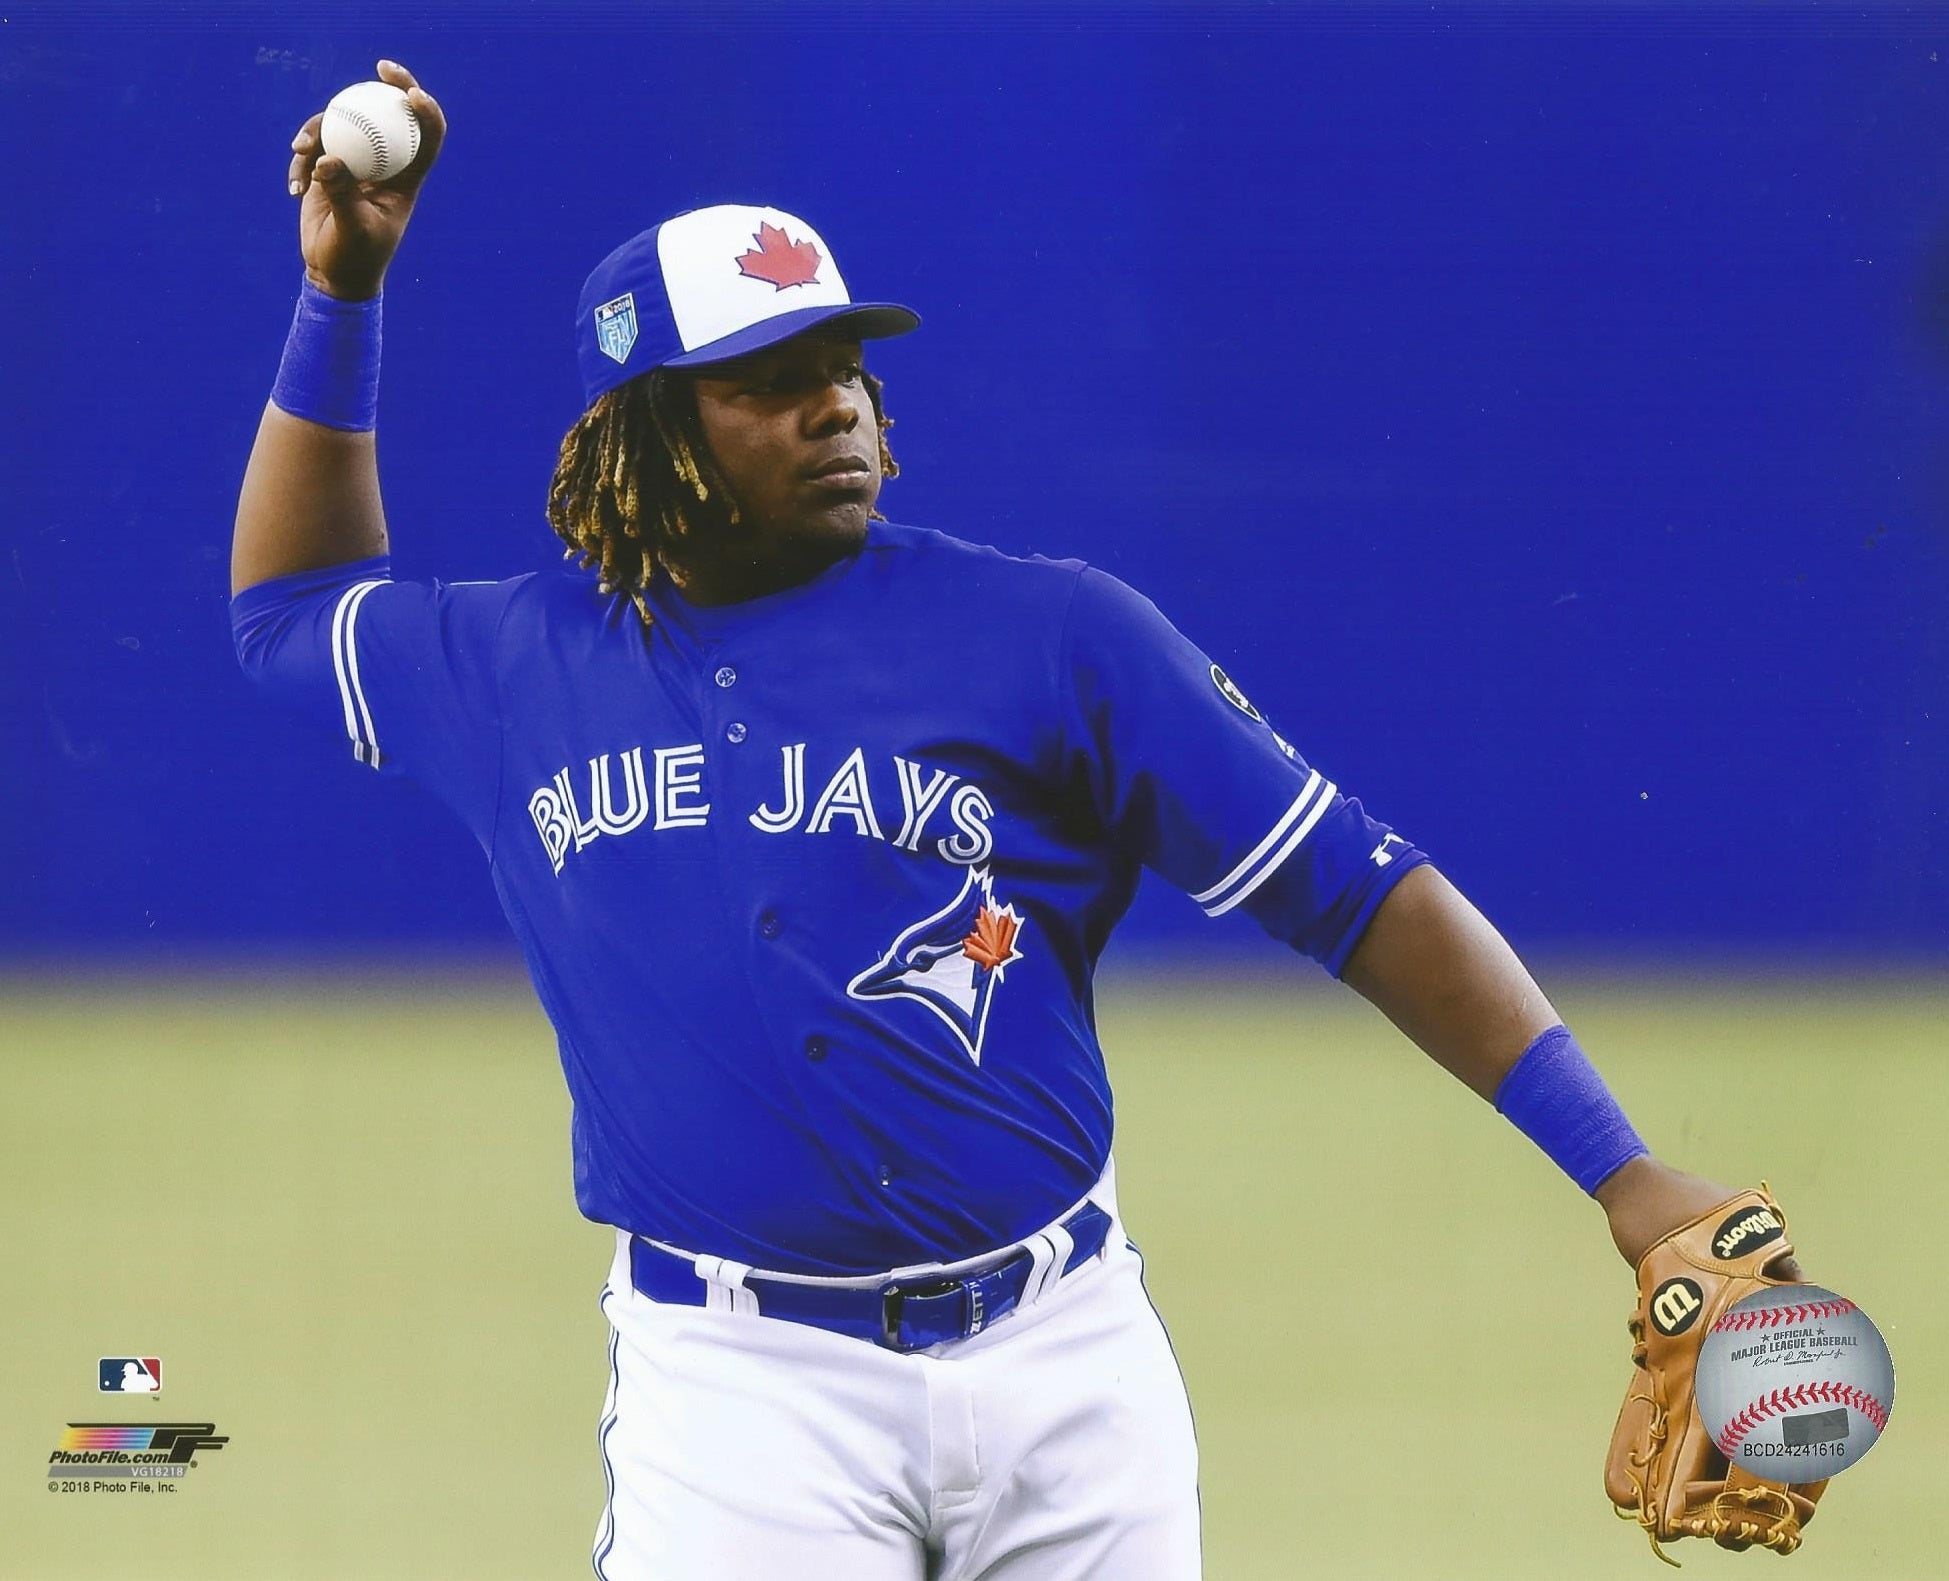 2019 All-Star Game Work Out Day Batting Practice Used Jersey - Vladimir  Guerrero Jr. (Toronto Blue Jays)